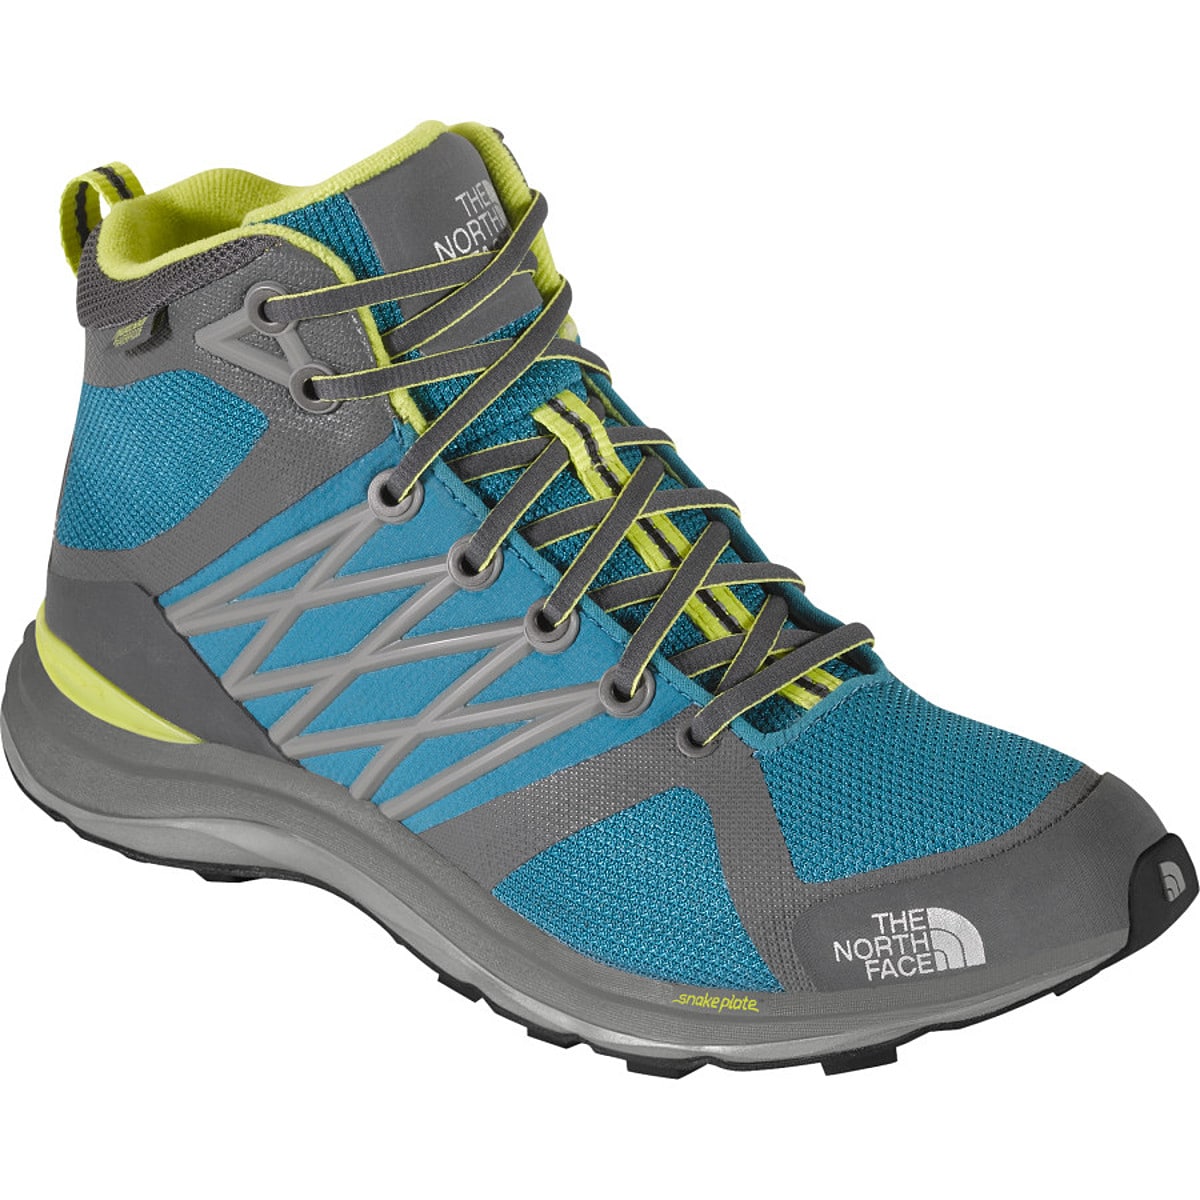 The North Face Litewave Guide Mid HyVent Hiking Boot -